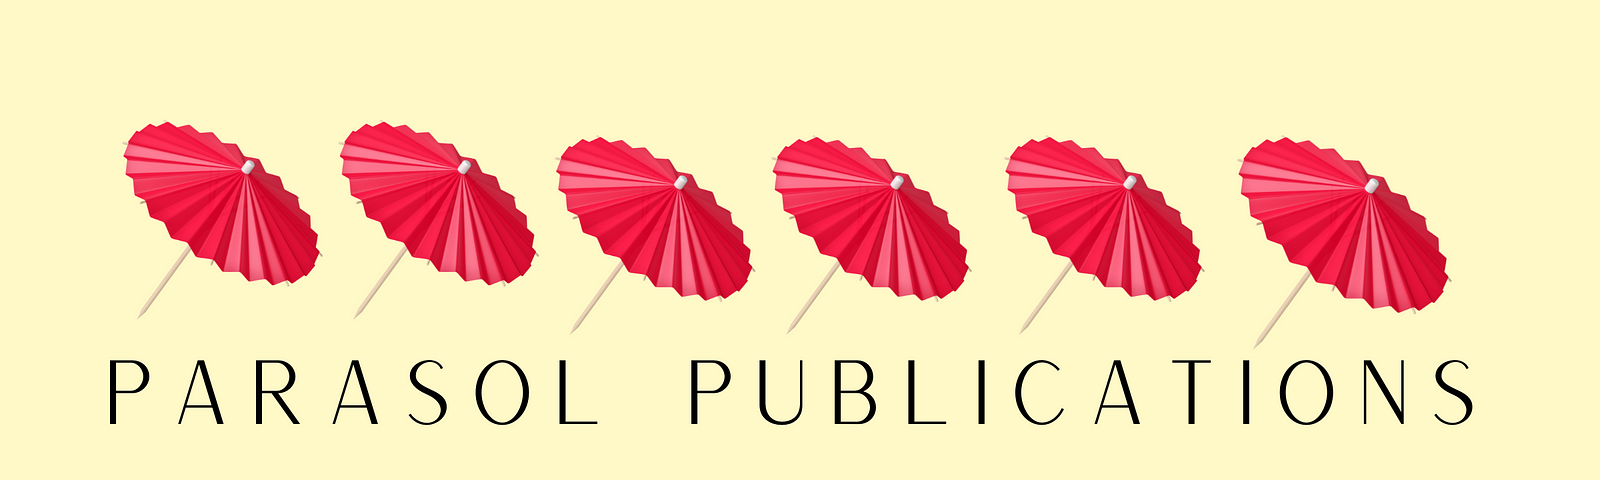 Parasol Publications page with red parasols on yellow background